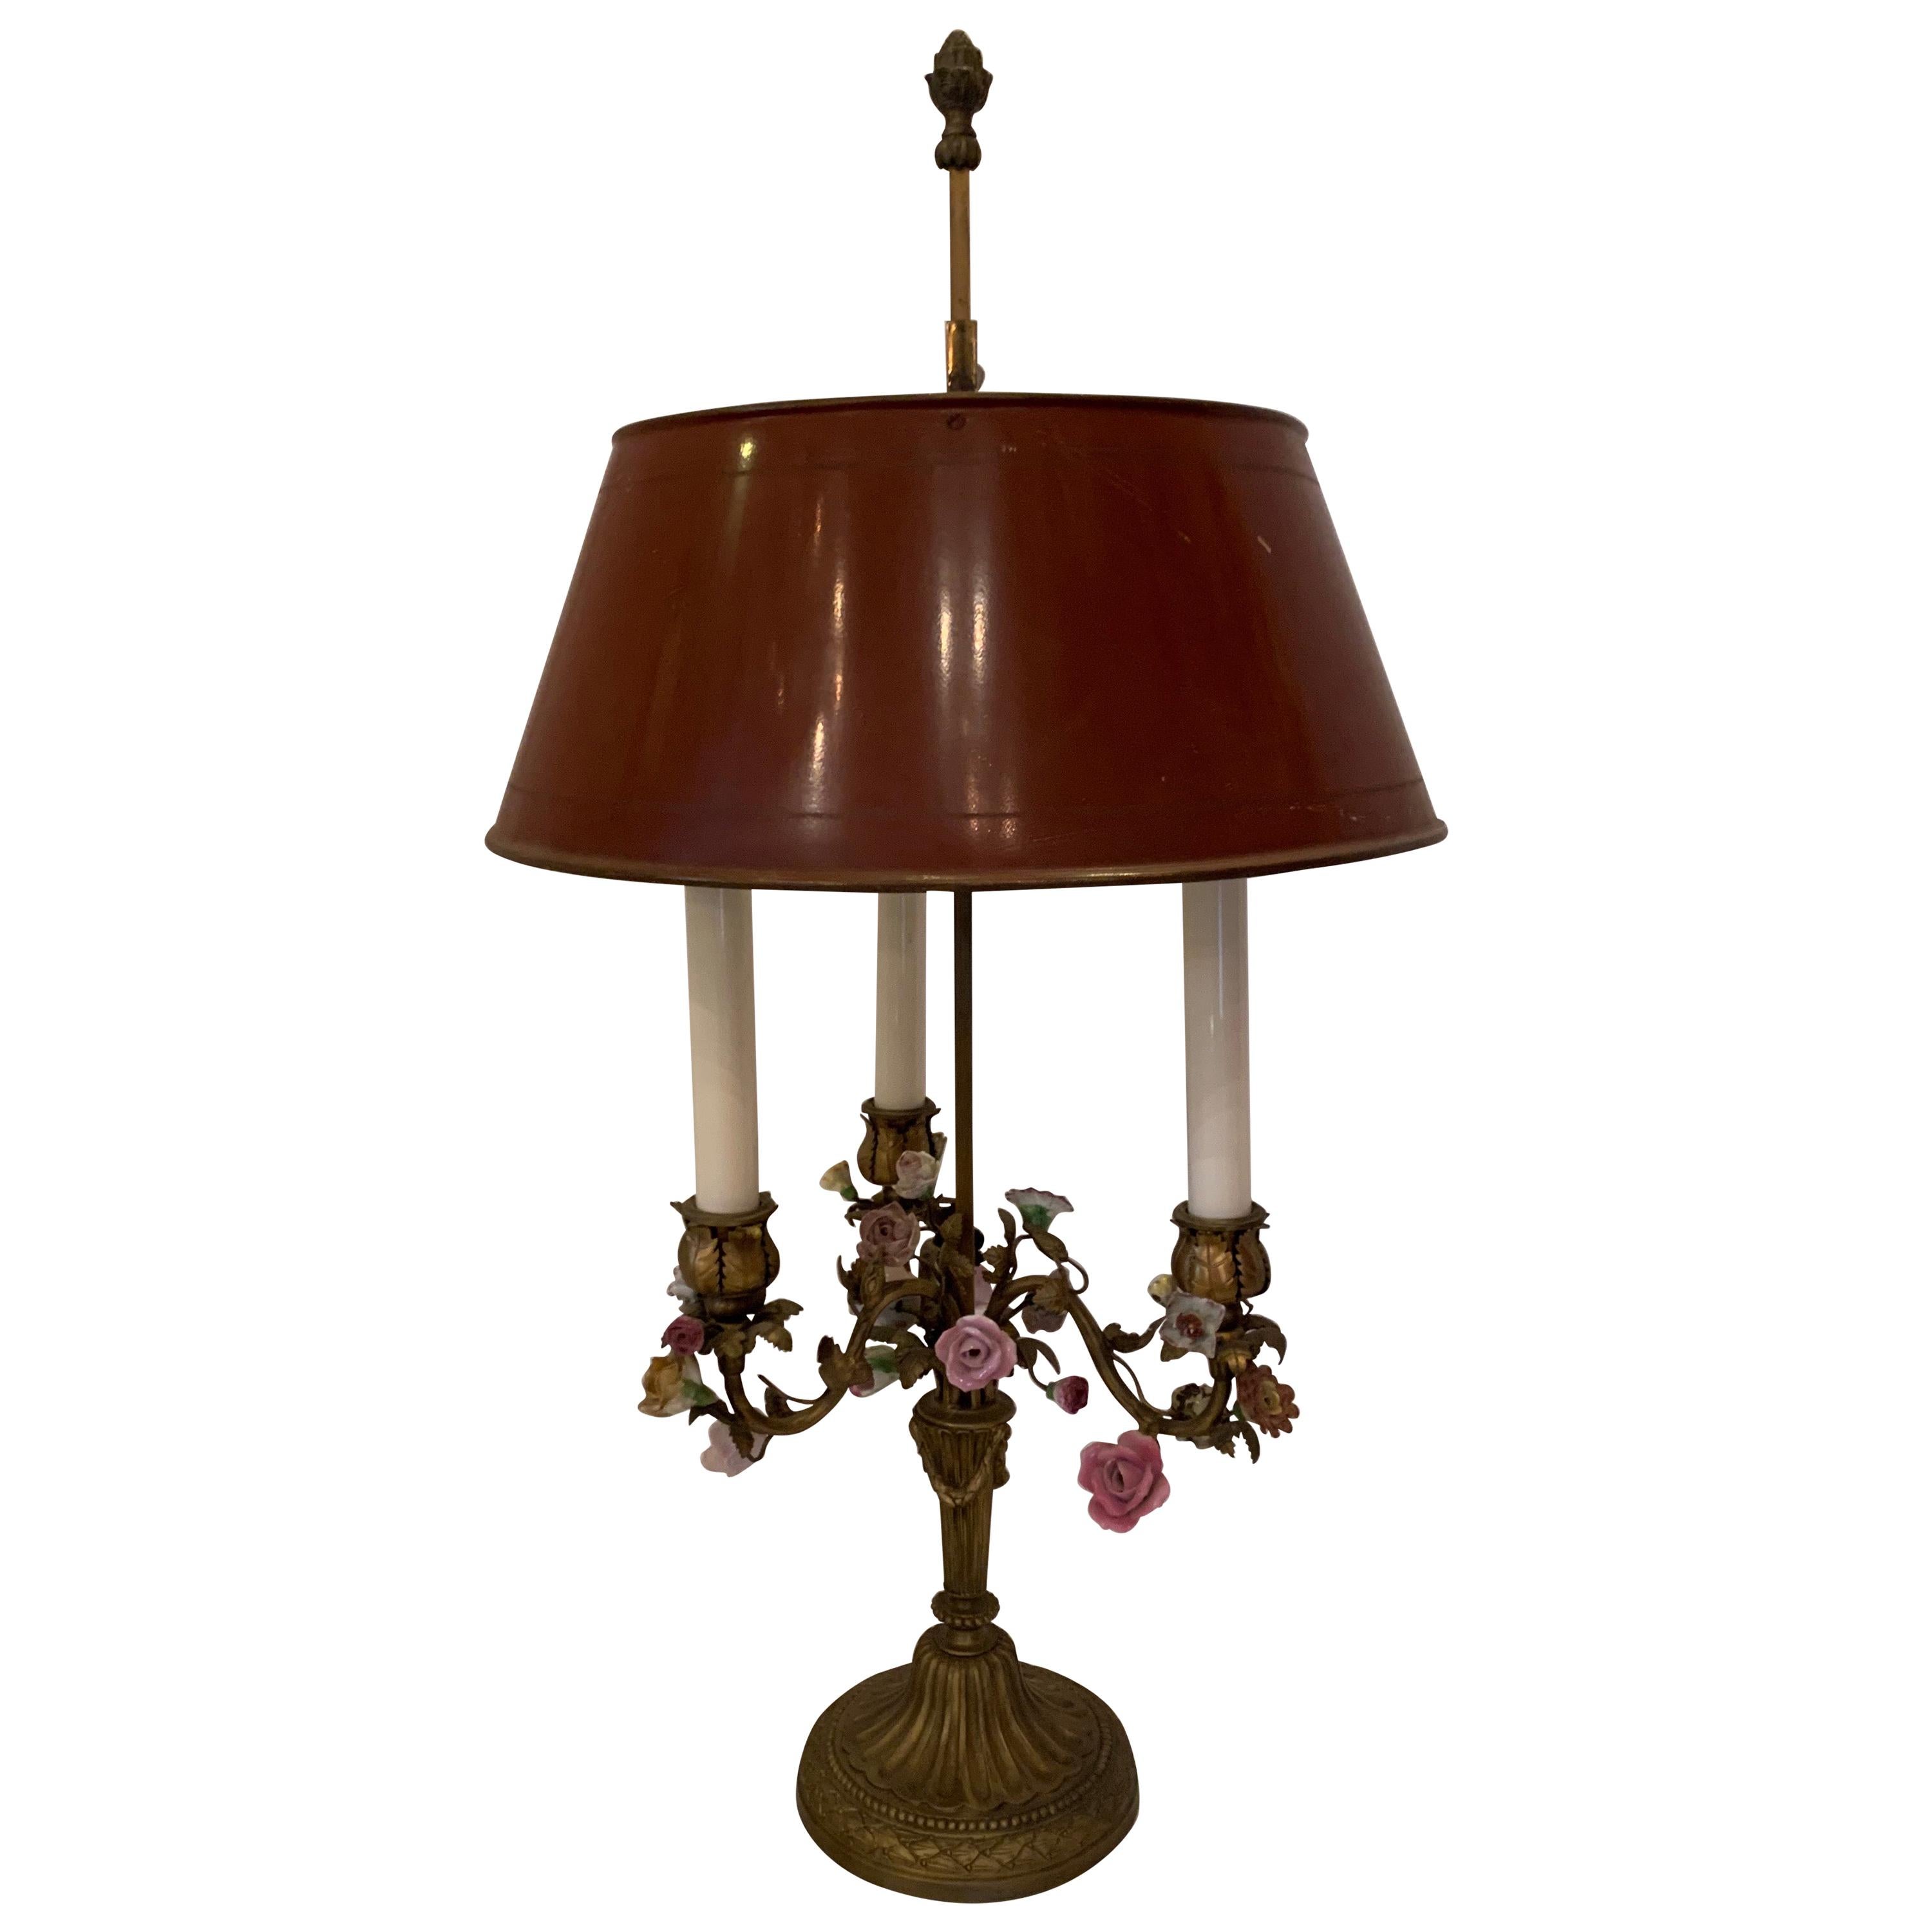 Wonderful French Bronze Candelabra Bouillotte Lamp Porcelain Flowers Tole Shade For Sale